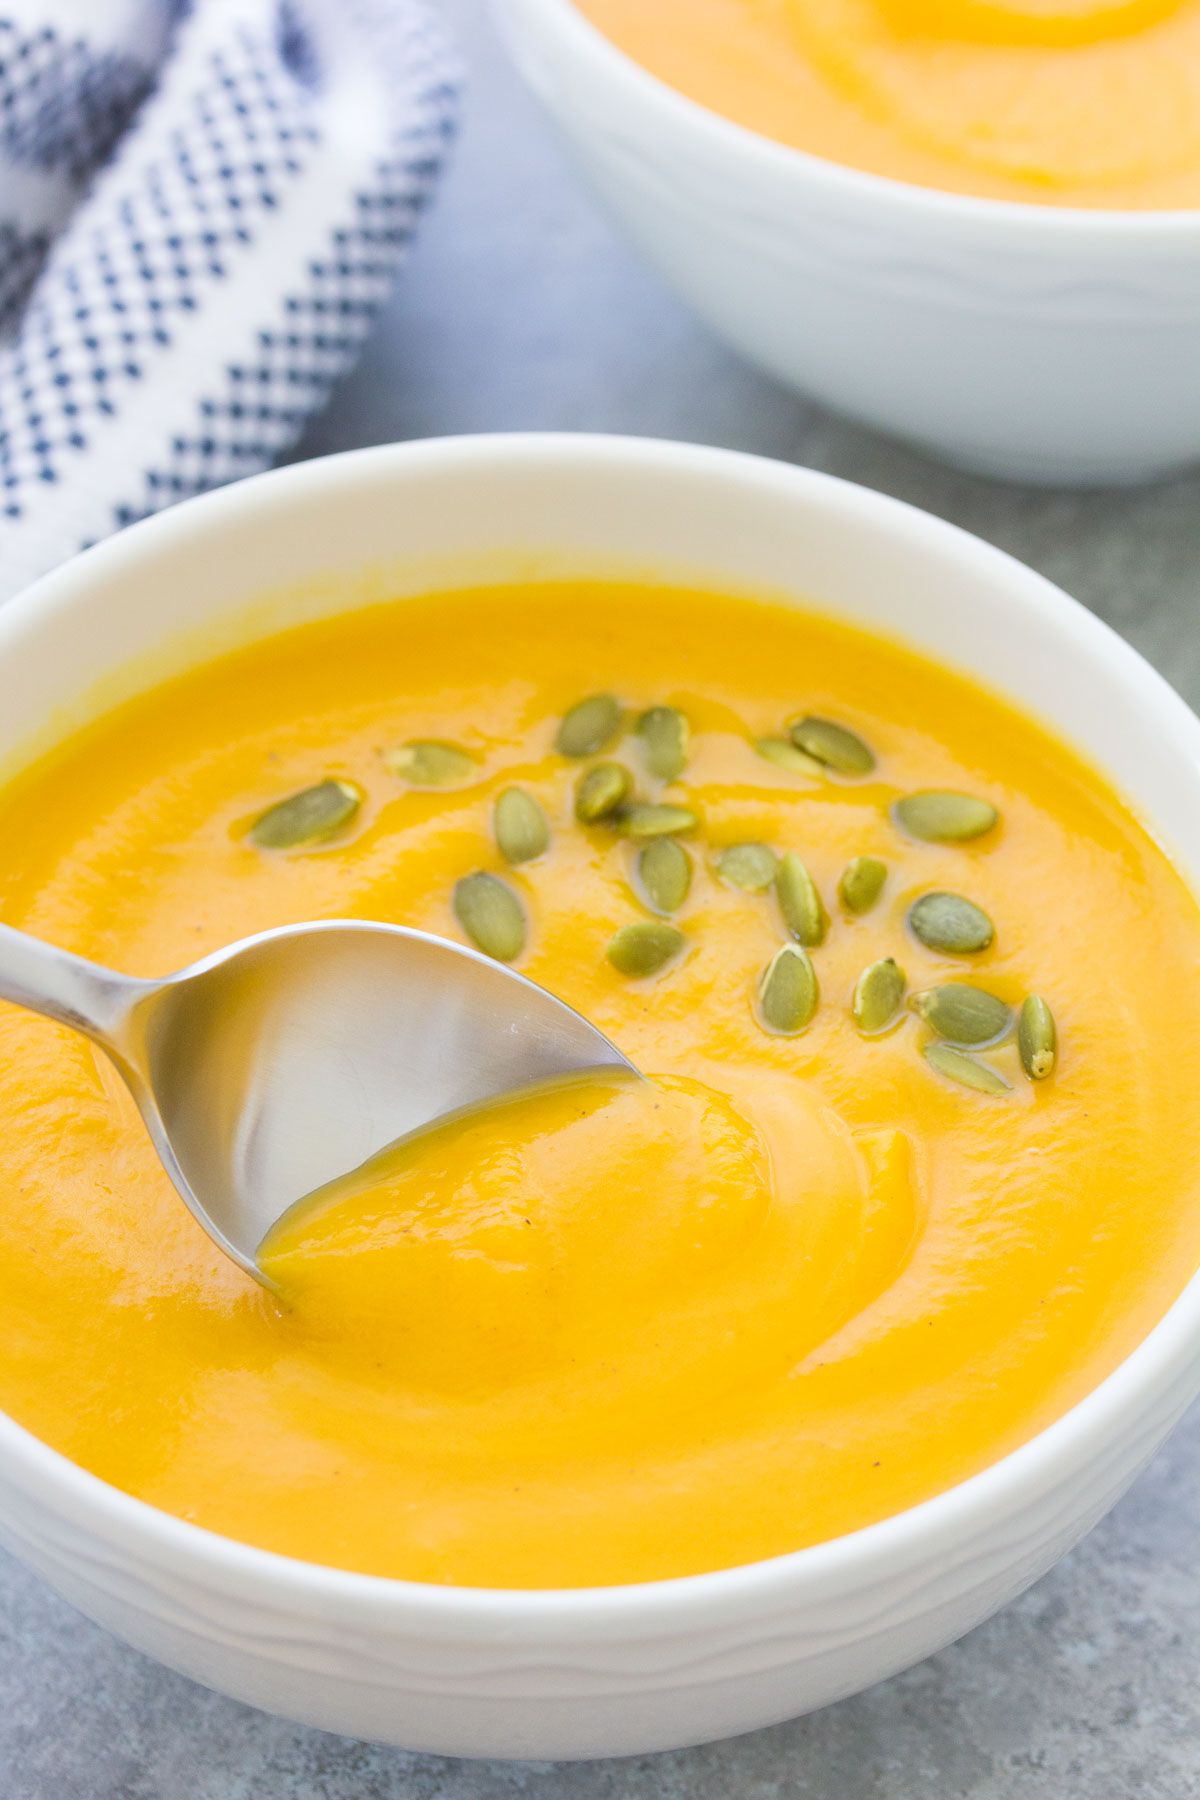 Use a spoon to scoop pumpkin soup in the instant pot